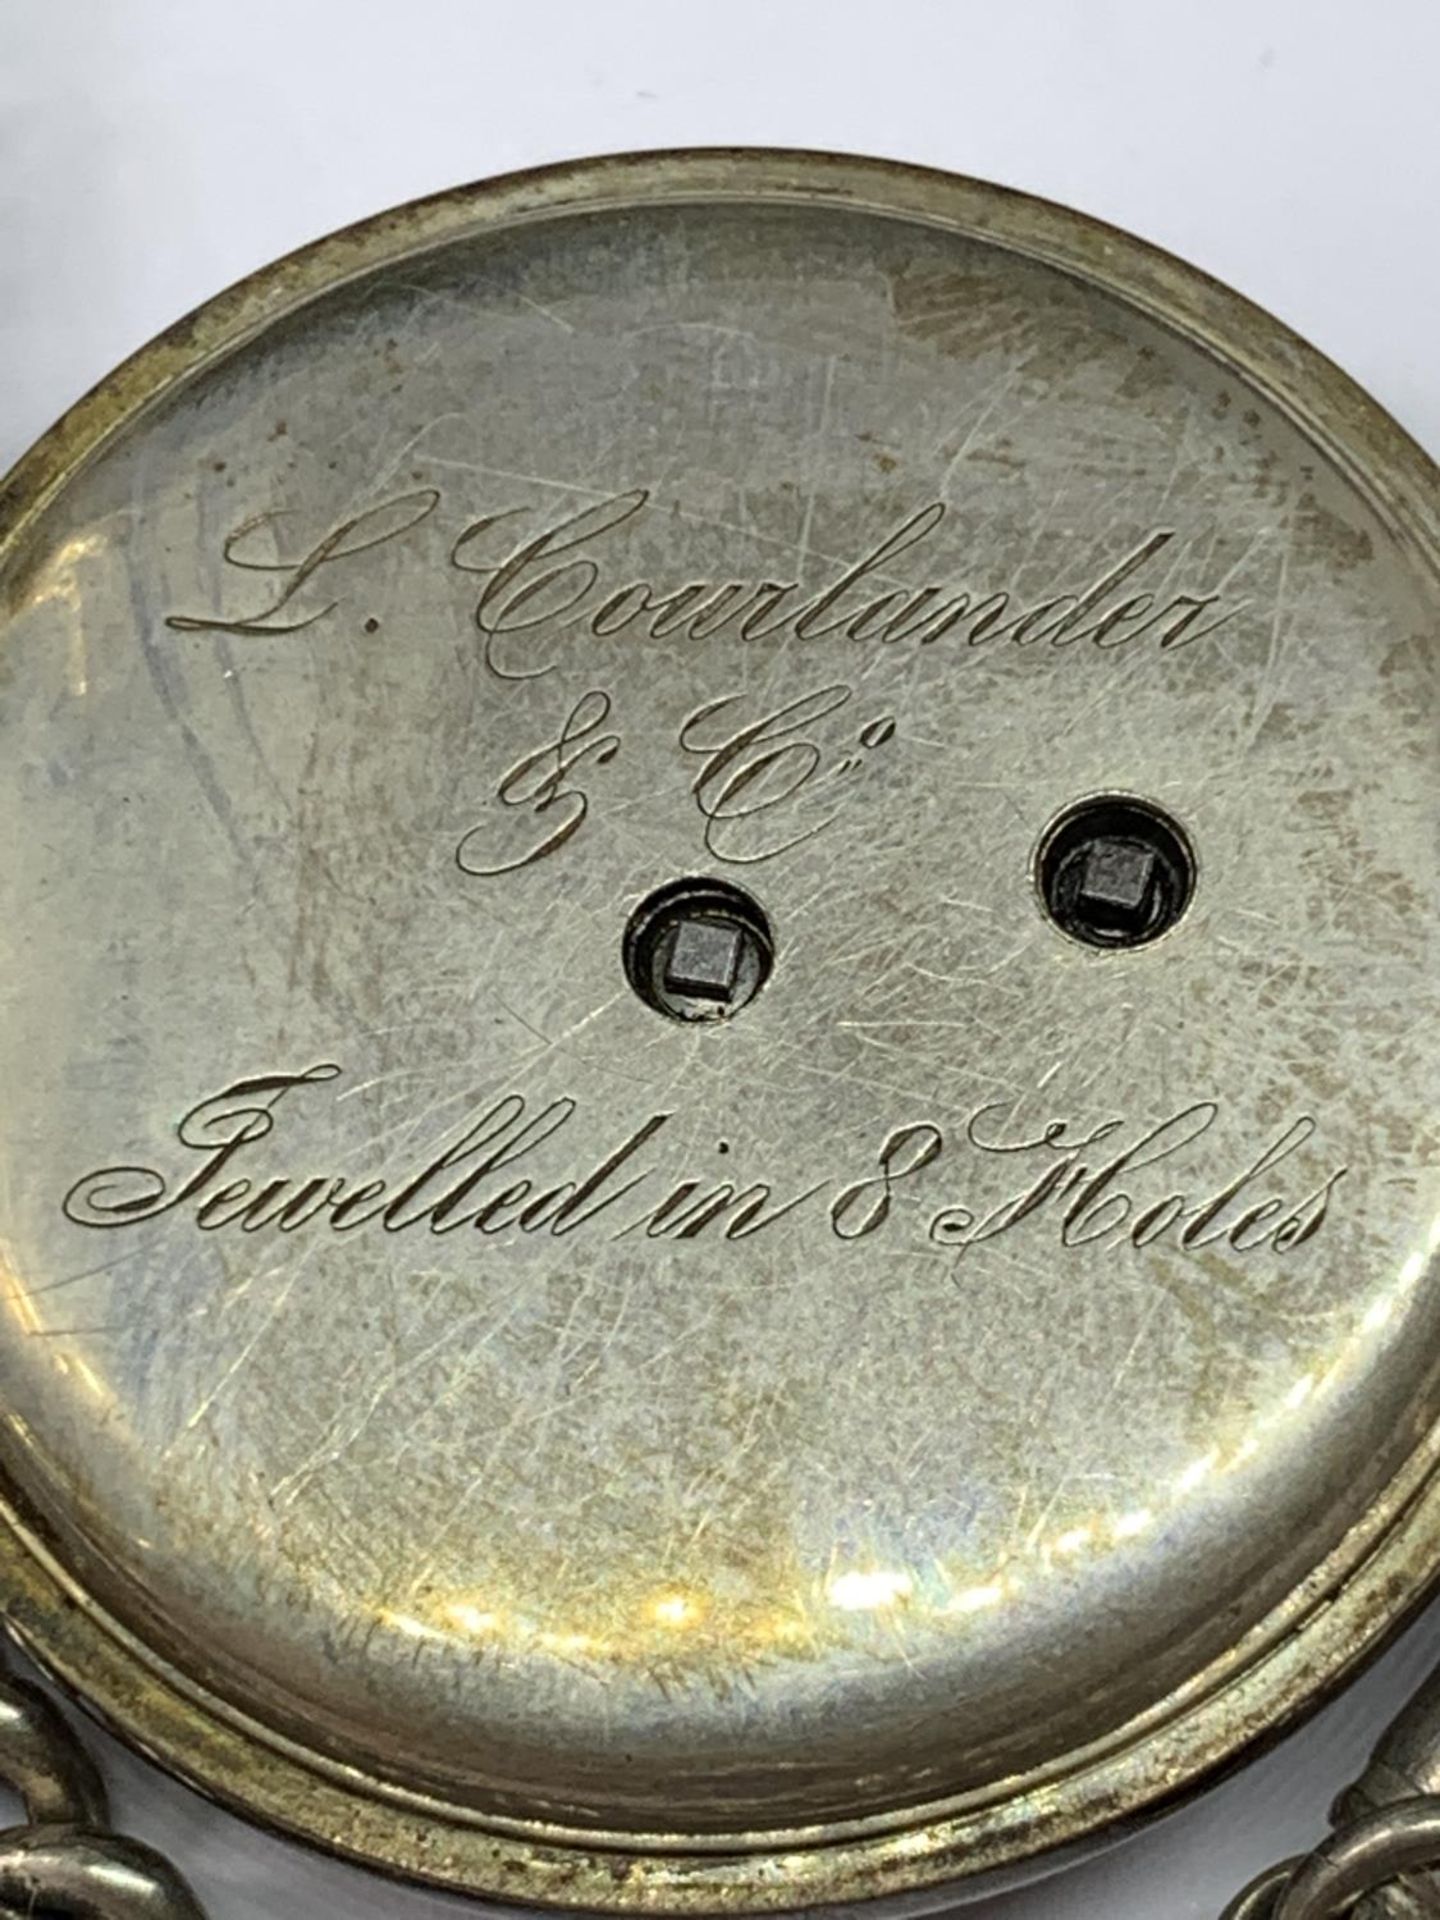 A SILVER POCKET WATCH WITH ALBERT CHAIN AND KEY IN A PRESENTATION BOX - Image 5 of 6